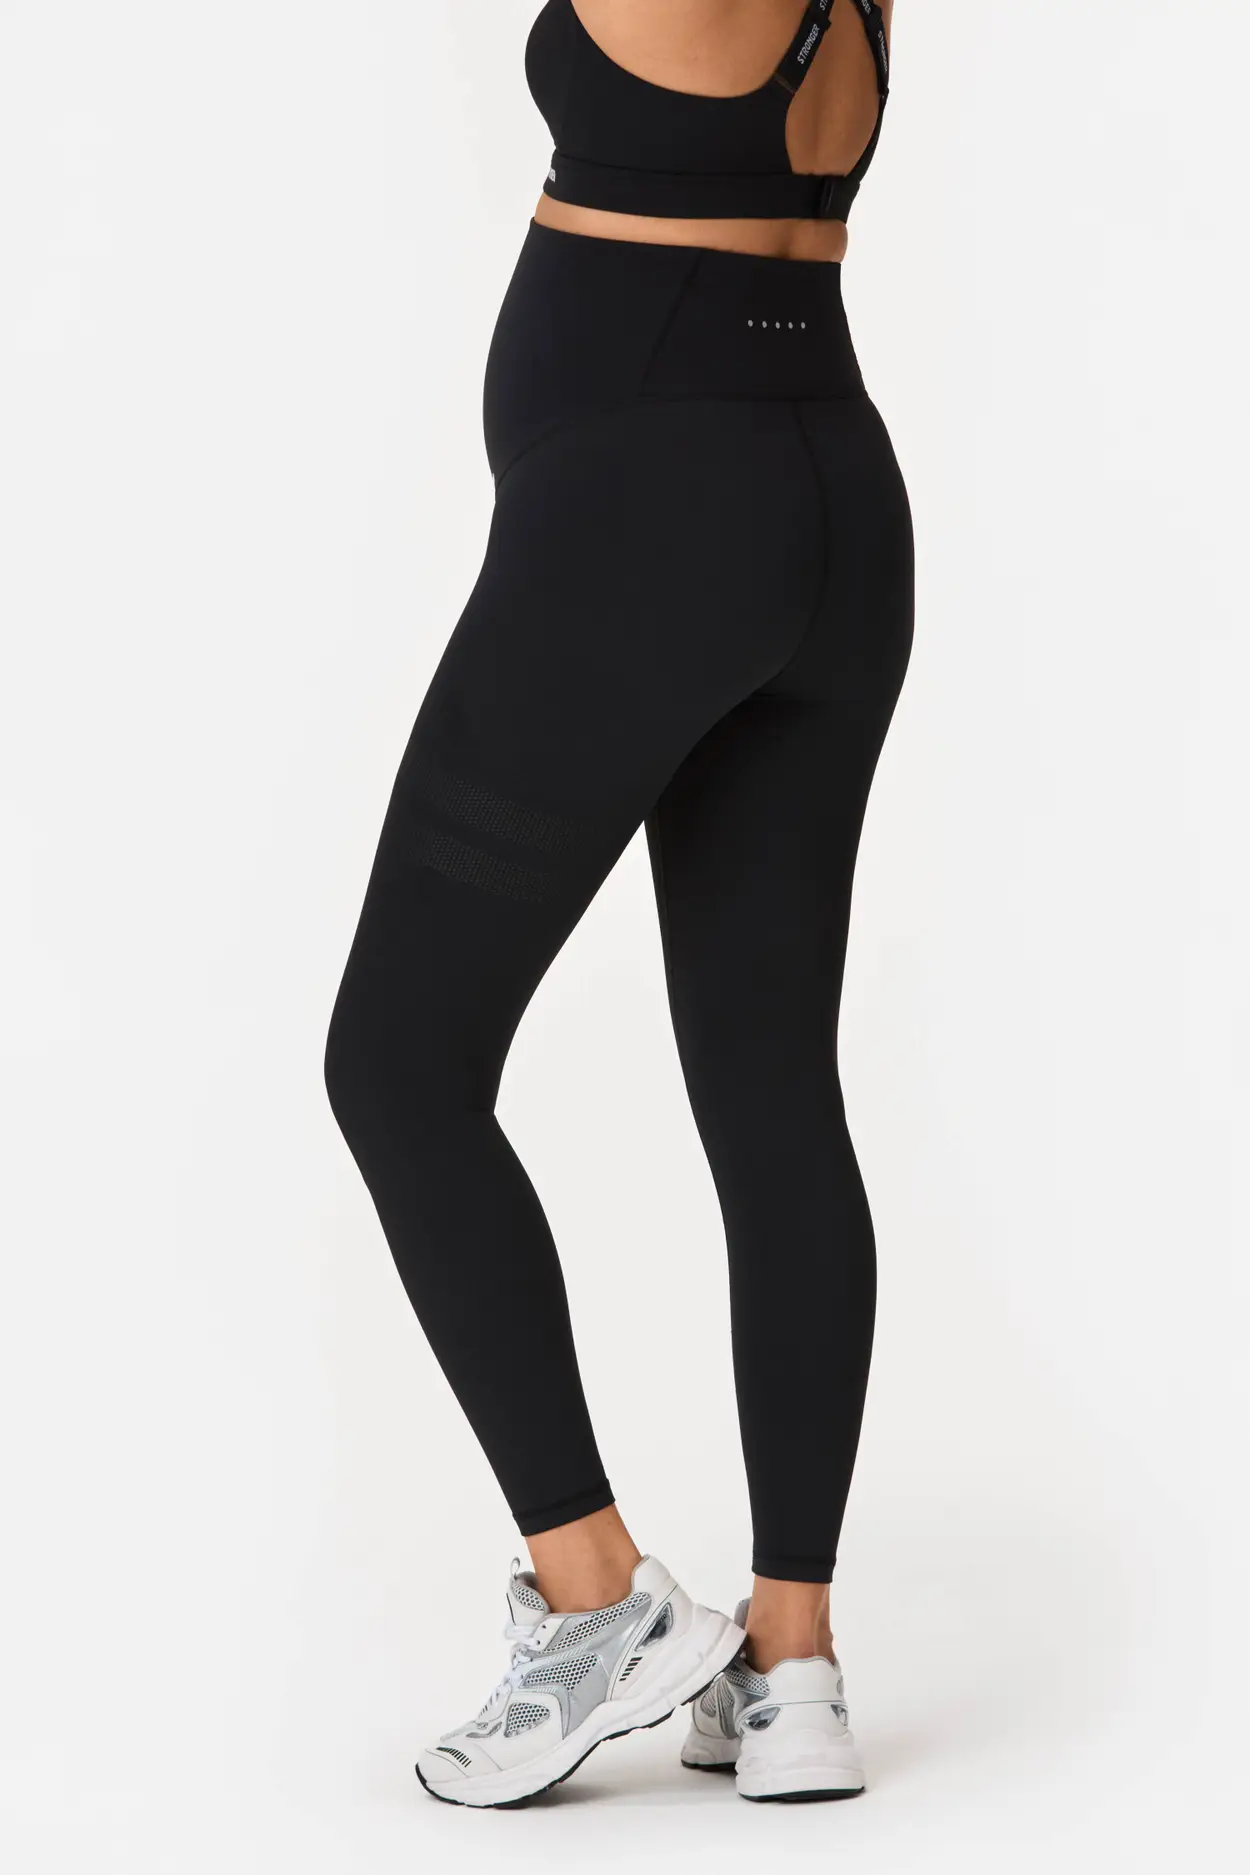 Generic Maternity Leggings with Anatomical Pregnancy Insert Grows